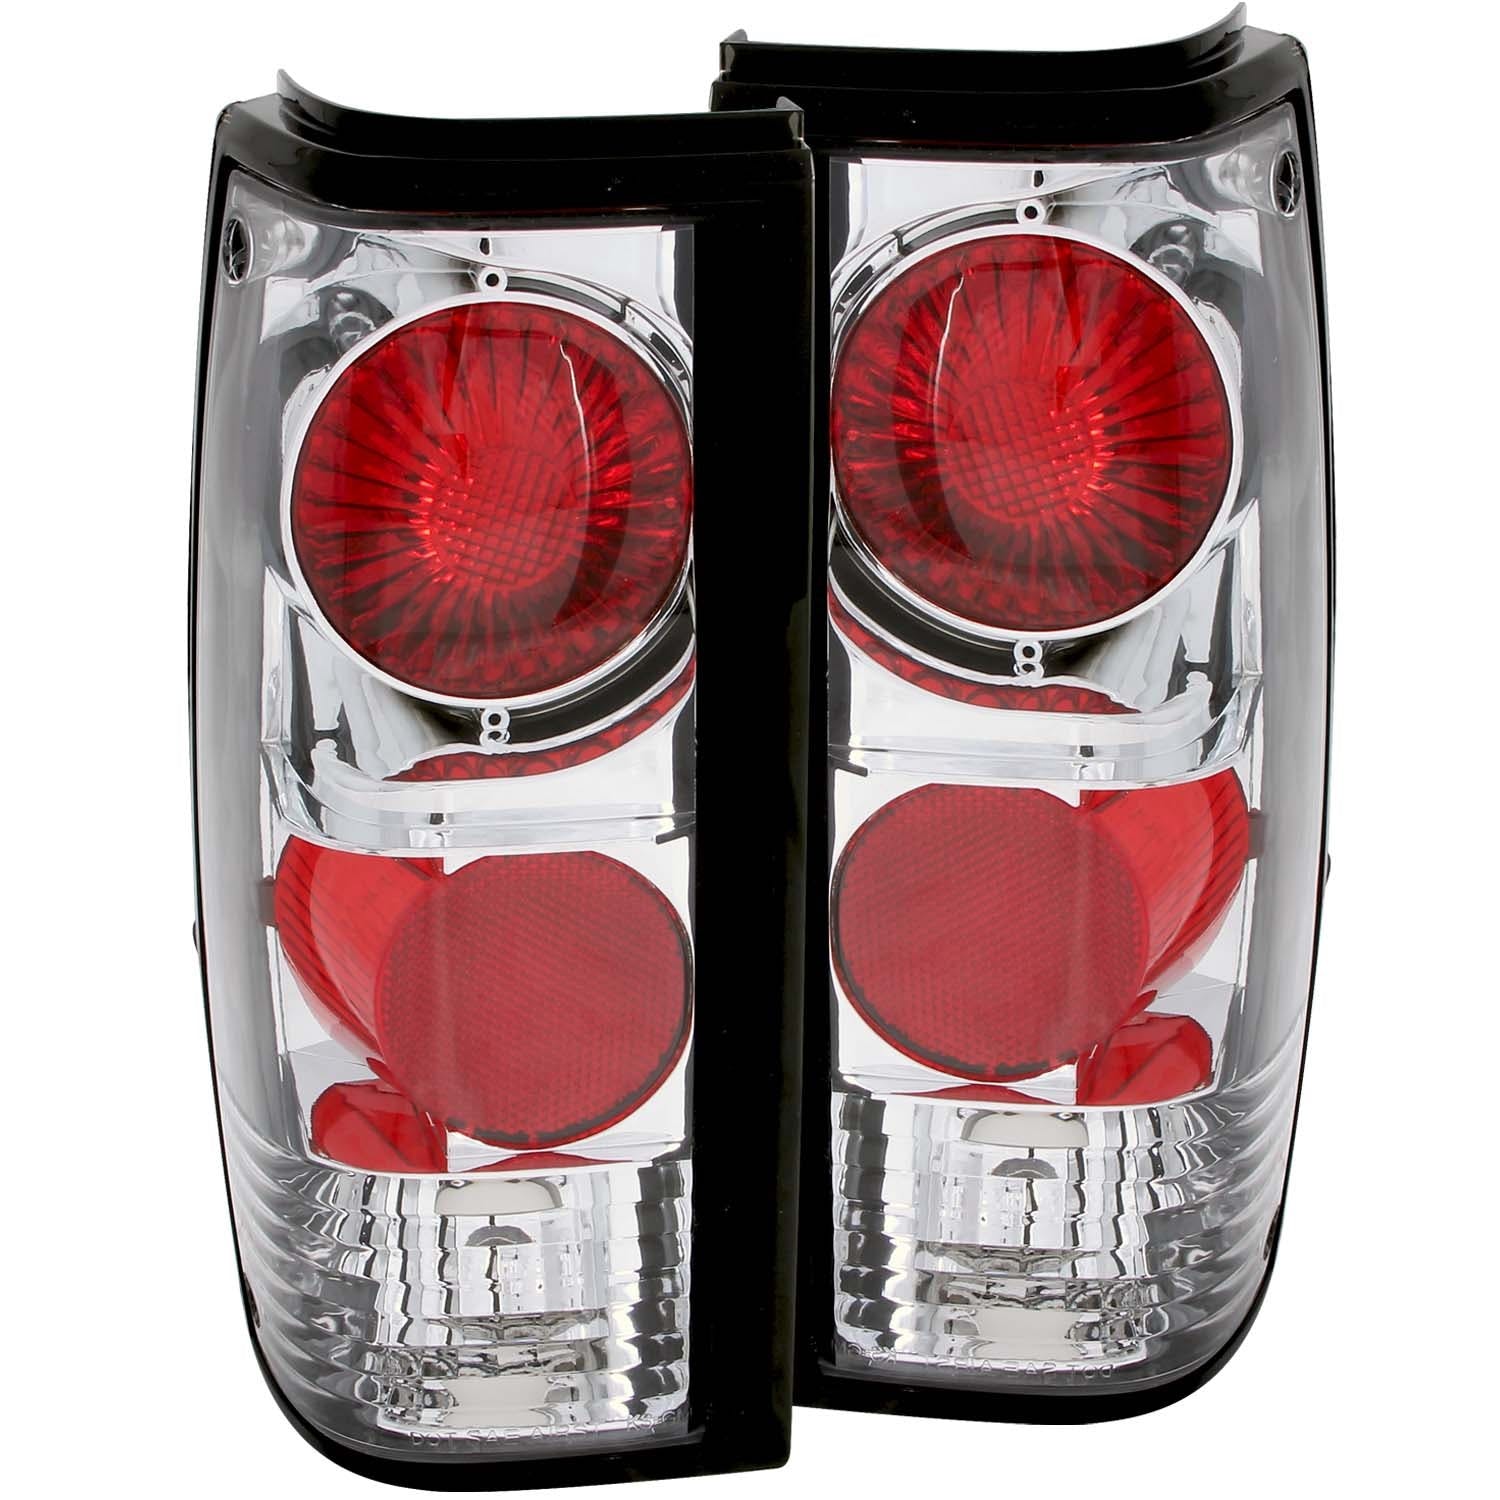 AnzoUSA 211029 Taillights Chrome